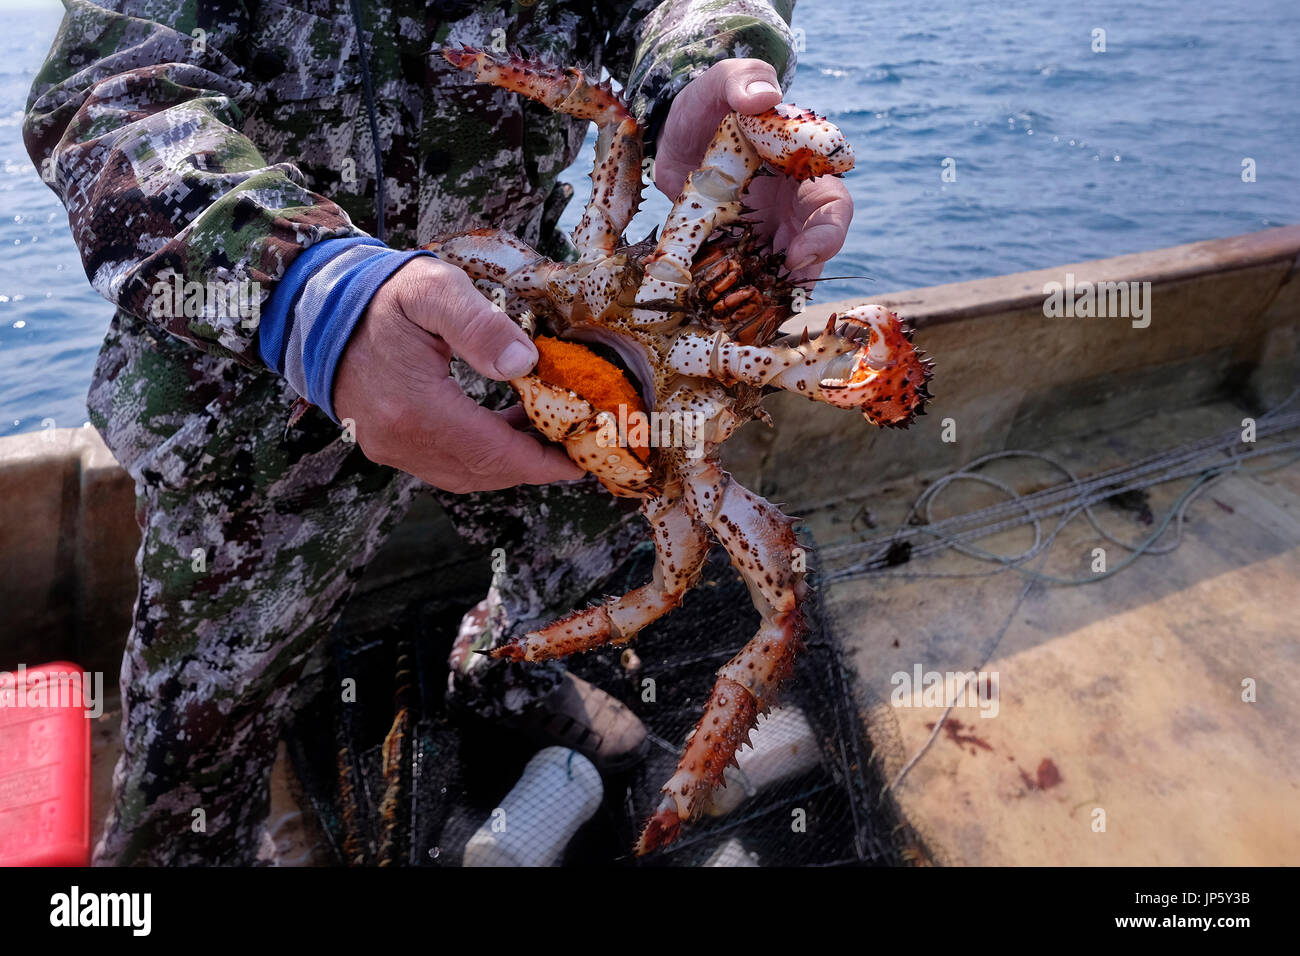 A fisherman holds a giant female red crab, Paralithodes camtschaticus, also called Kamchatka crab which carry orange-colored sponge-like masses of eggs that remain attached to her belie until the eggs hatch in the Sea of Okhotsk a marginal sea of the western Pacific Ocean. Russia Stock Photo